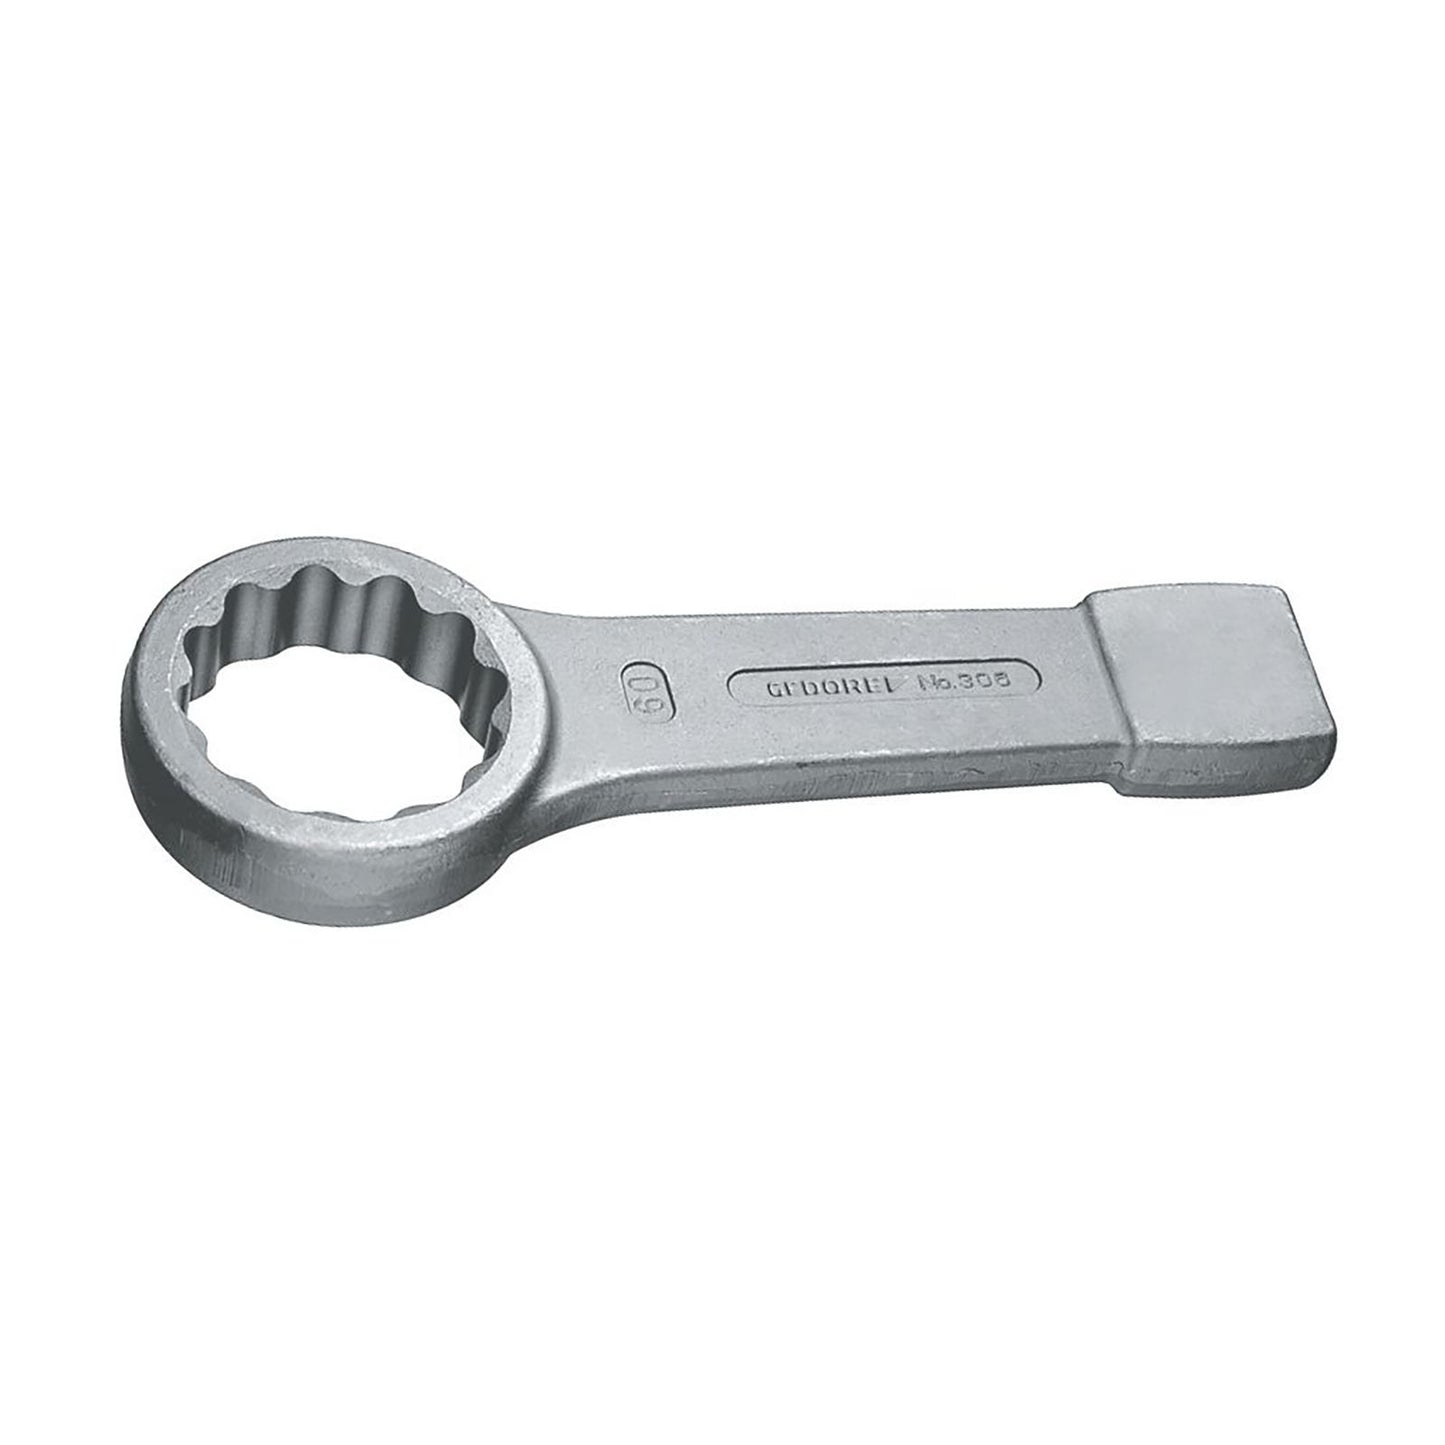 GEDORE 306 120 - Closed Strike Wrench, 120mm (6477210)